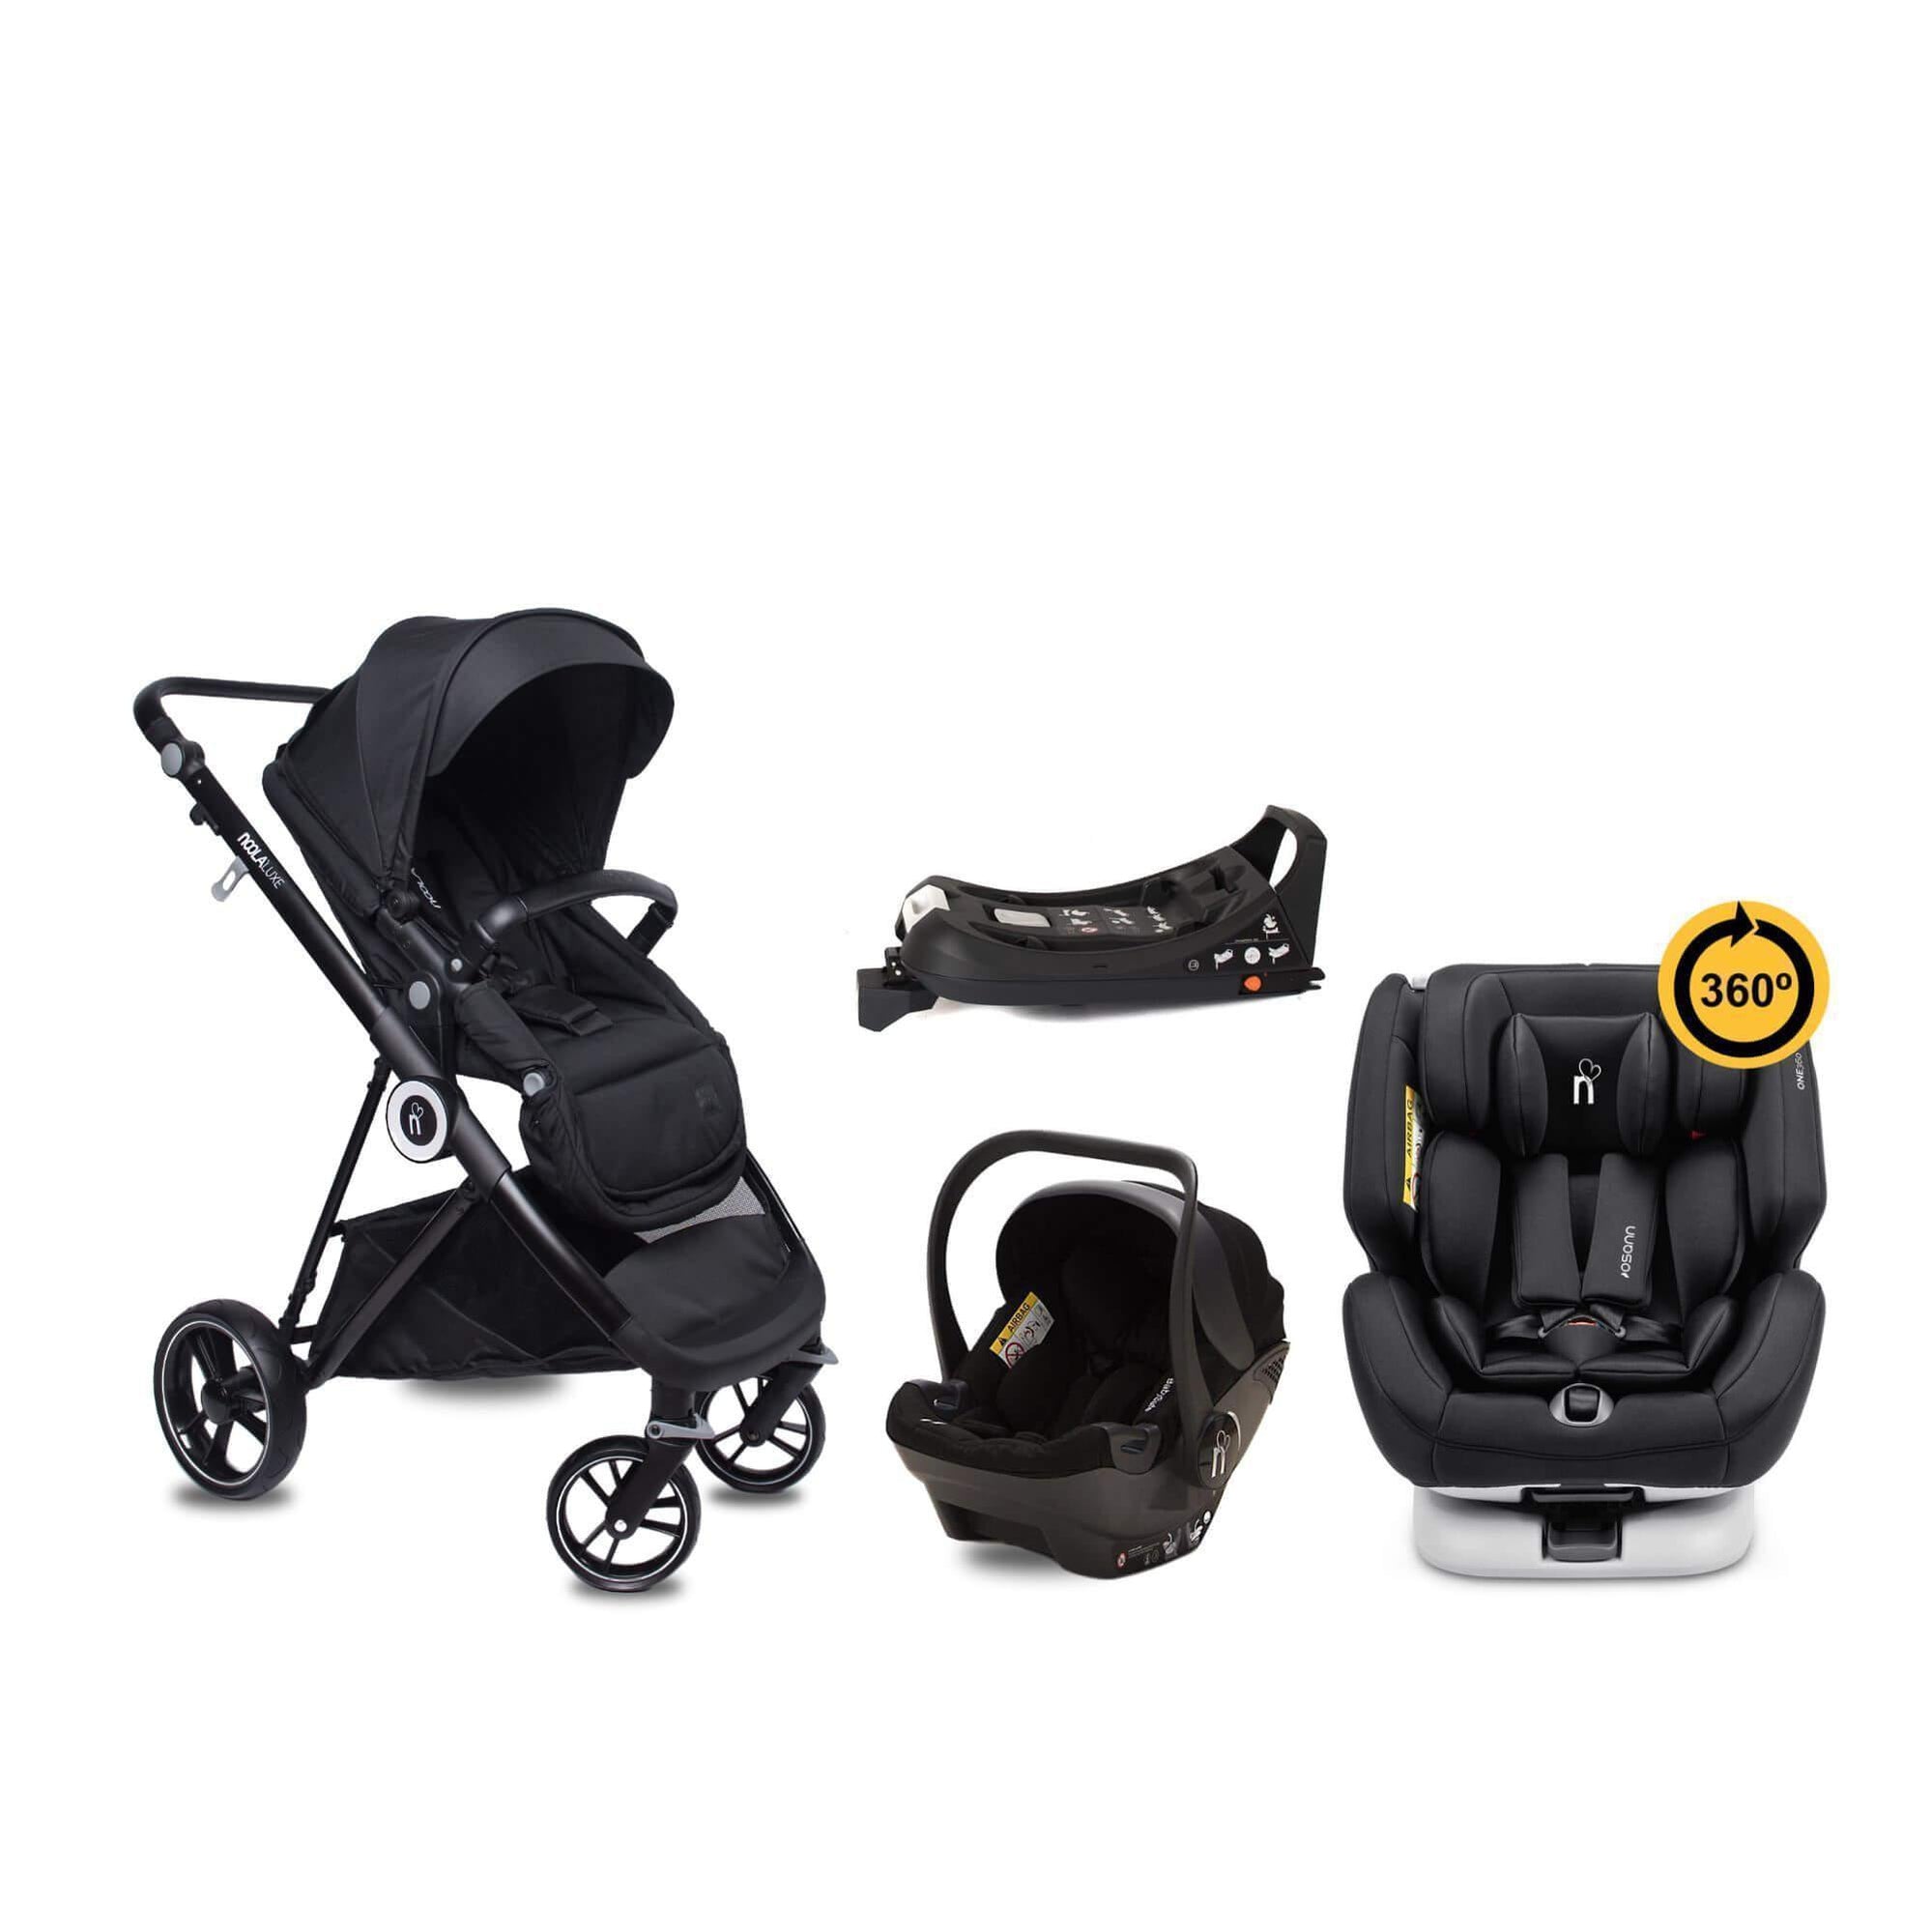 noola luxe 5in1 baby stroller midnight black #SELECT THE COLOUR OF YOUR ONE360_ONE360 | MIDNIGHT BLACK